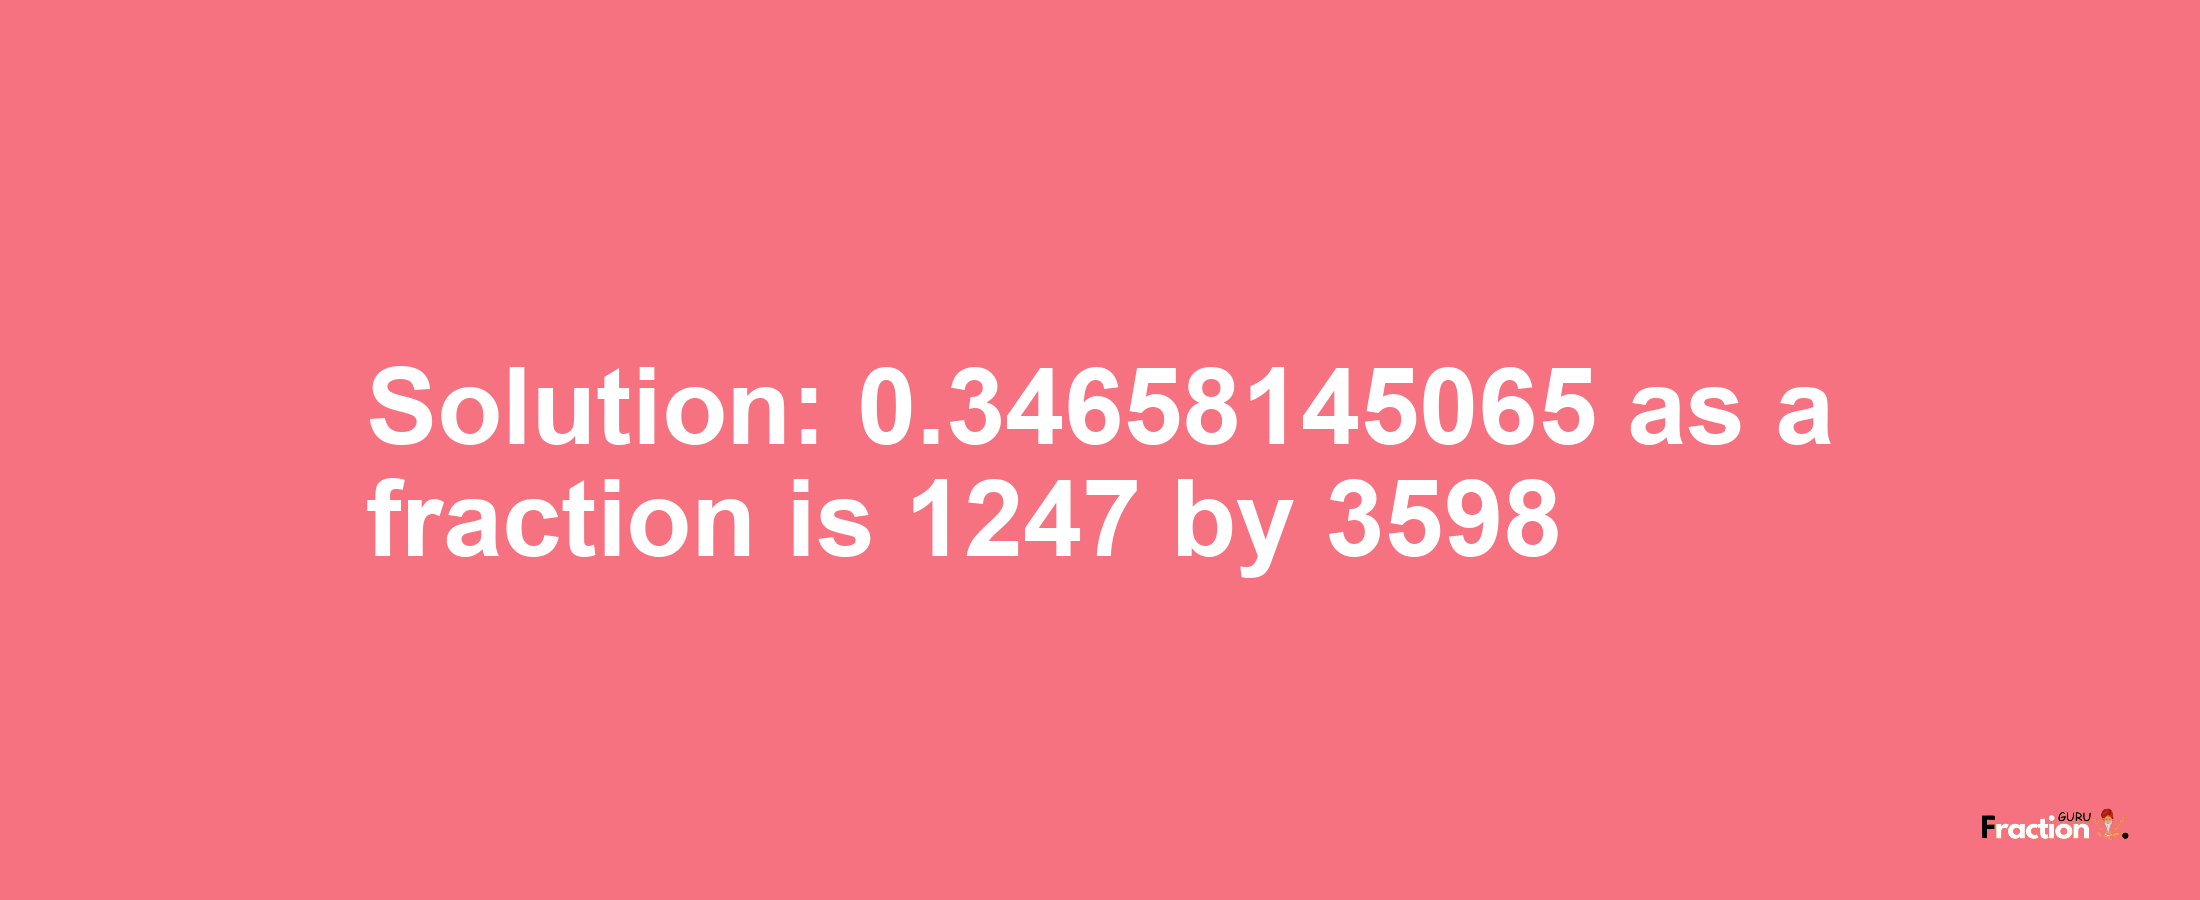 Solution:0.34658145065 as a fraction is 1247/3598